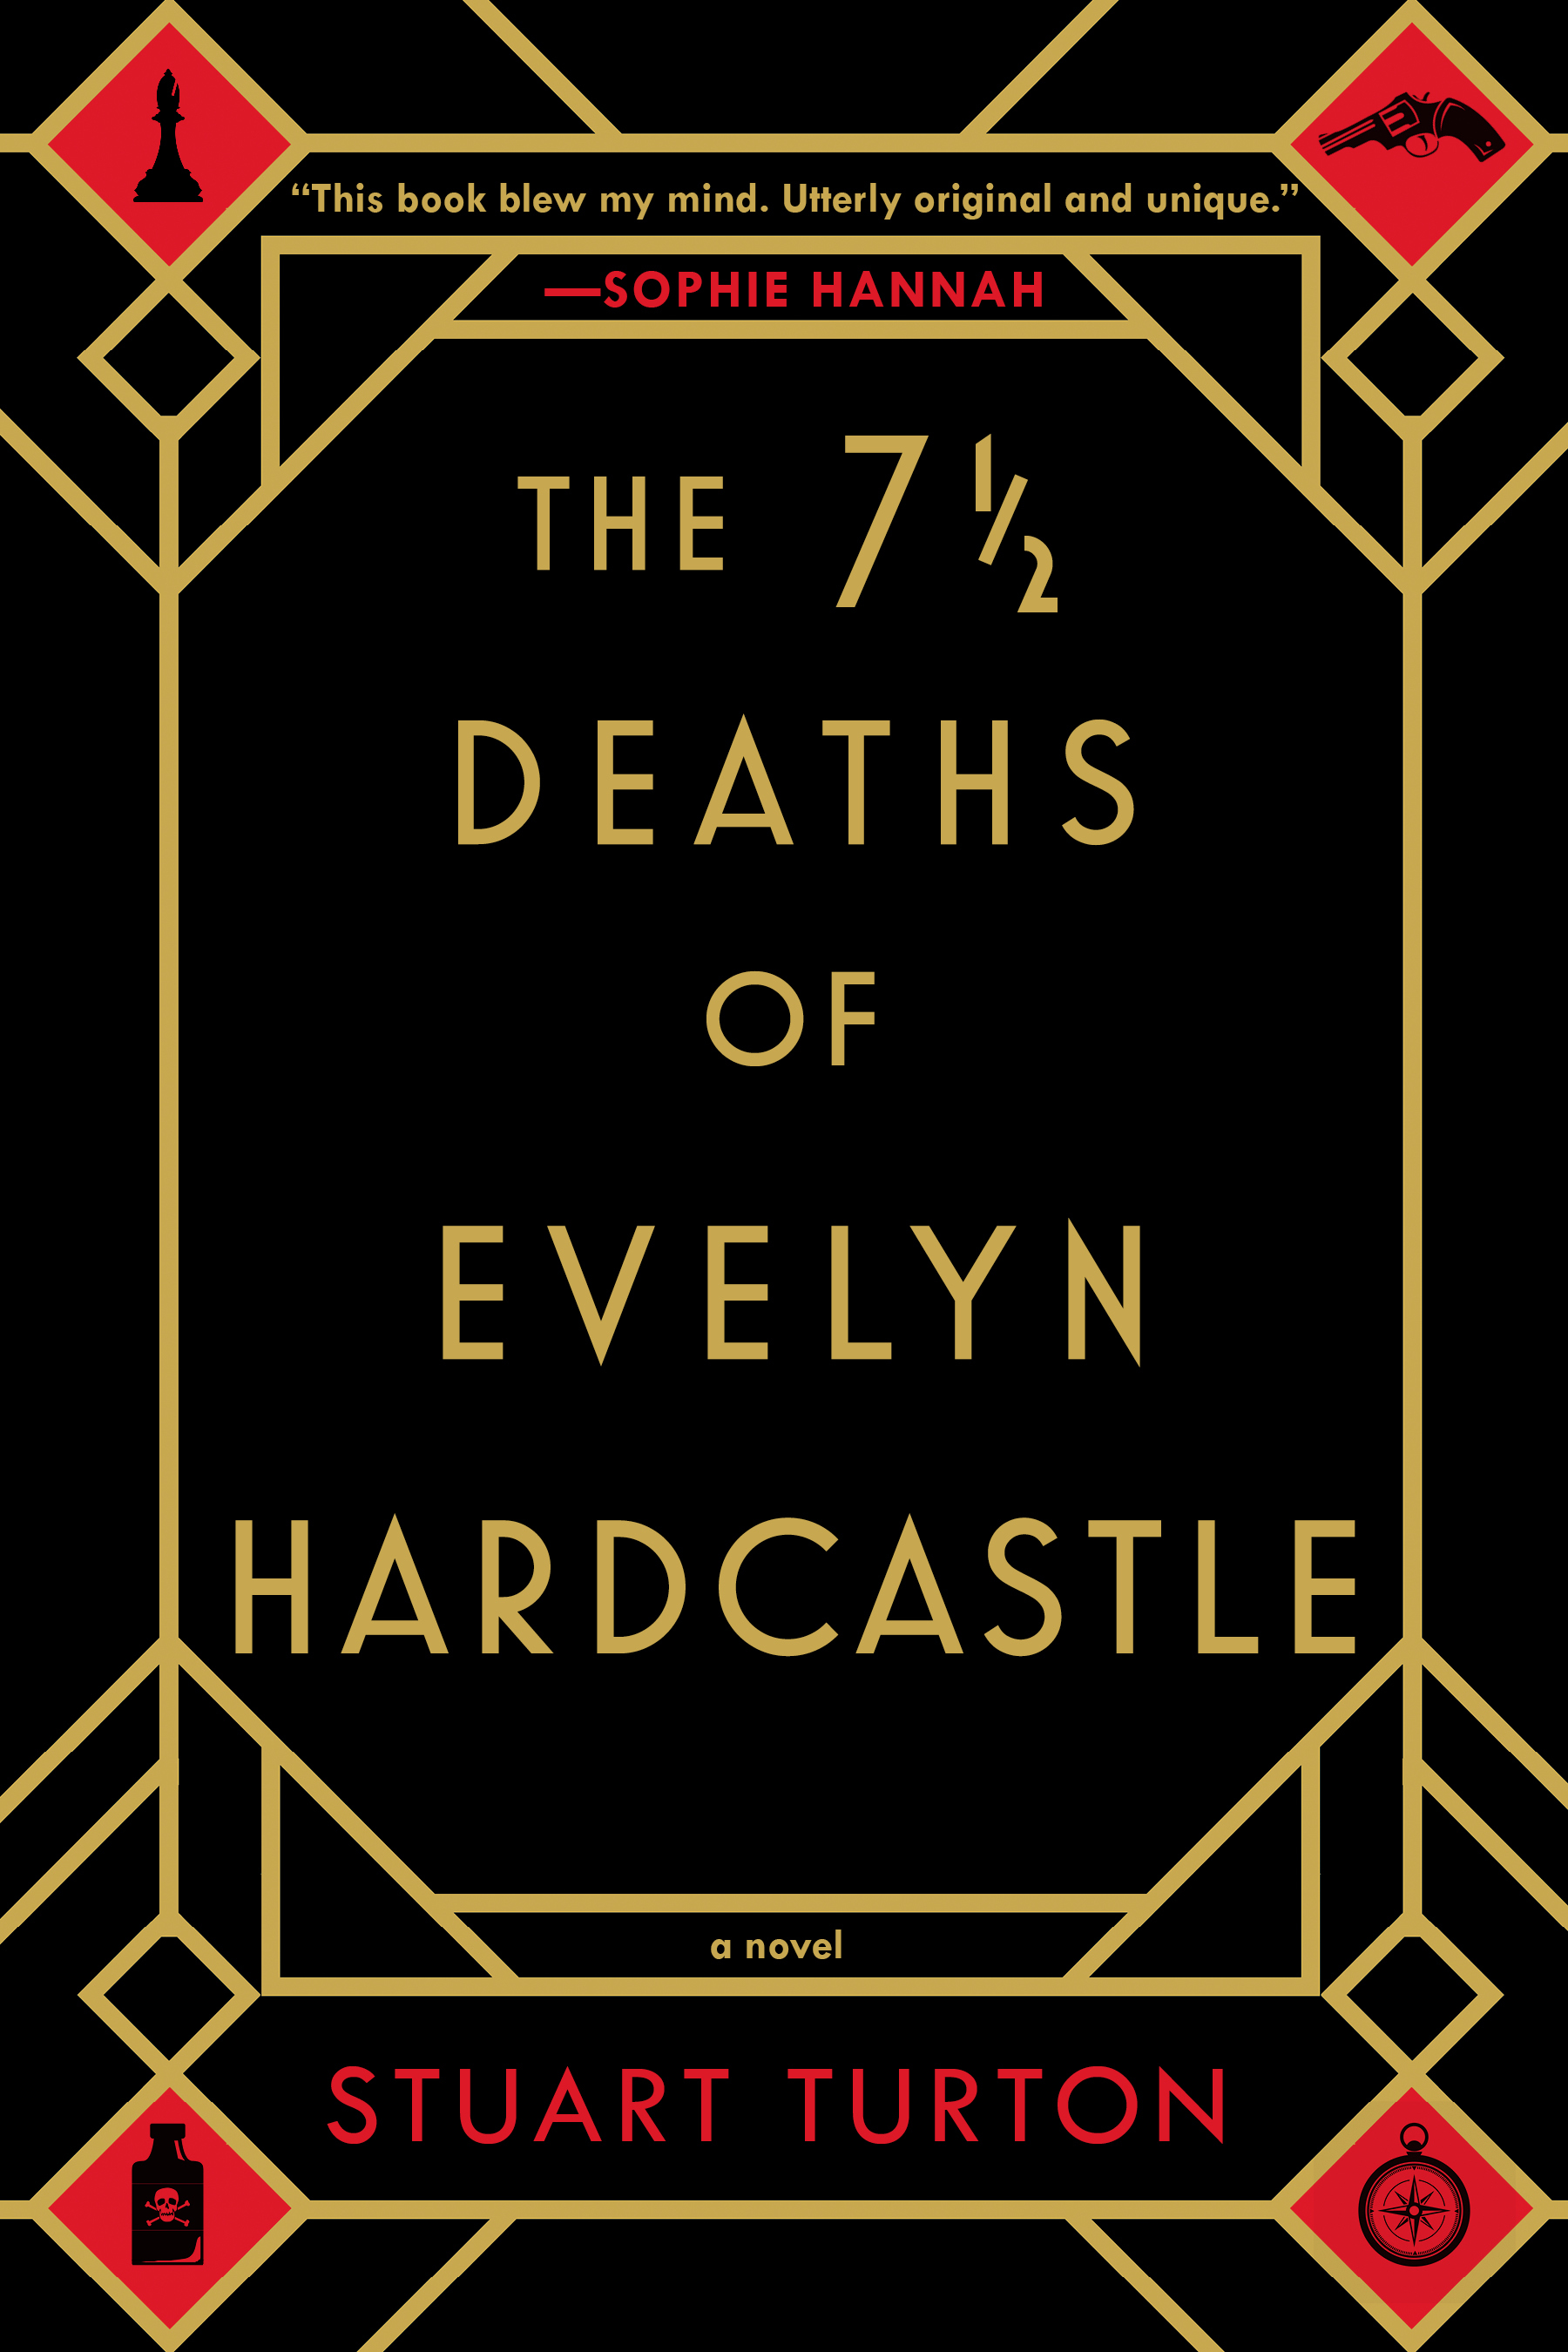 The cover of the book "The 7 1/2 deaths of Evelyn Hardcastle" by Stuart TurtonA black cover with golden lines encircling the title of the book with the corners having red diamonds. The top left shows a chess pawn. The top right shows a revolver. The bottom right shows a compass. The bottom left shows a bottle with a skull and crossbones on the face.